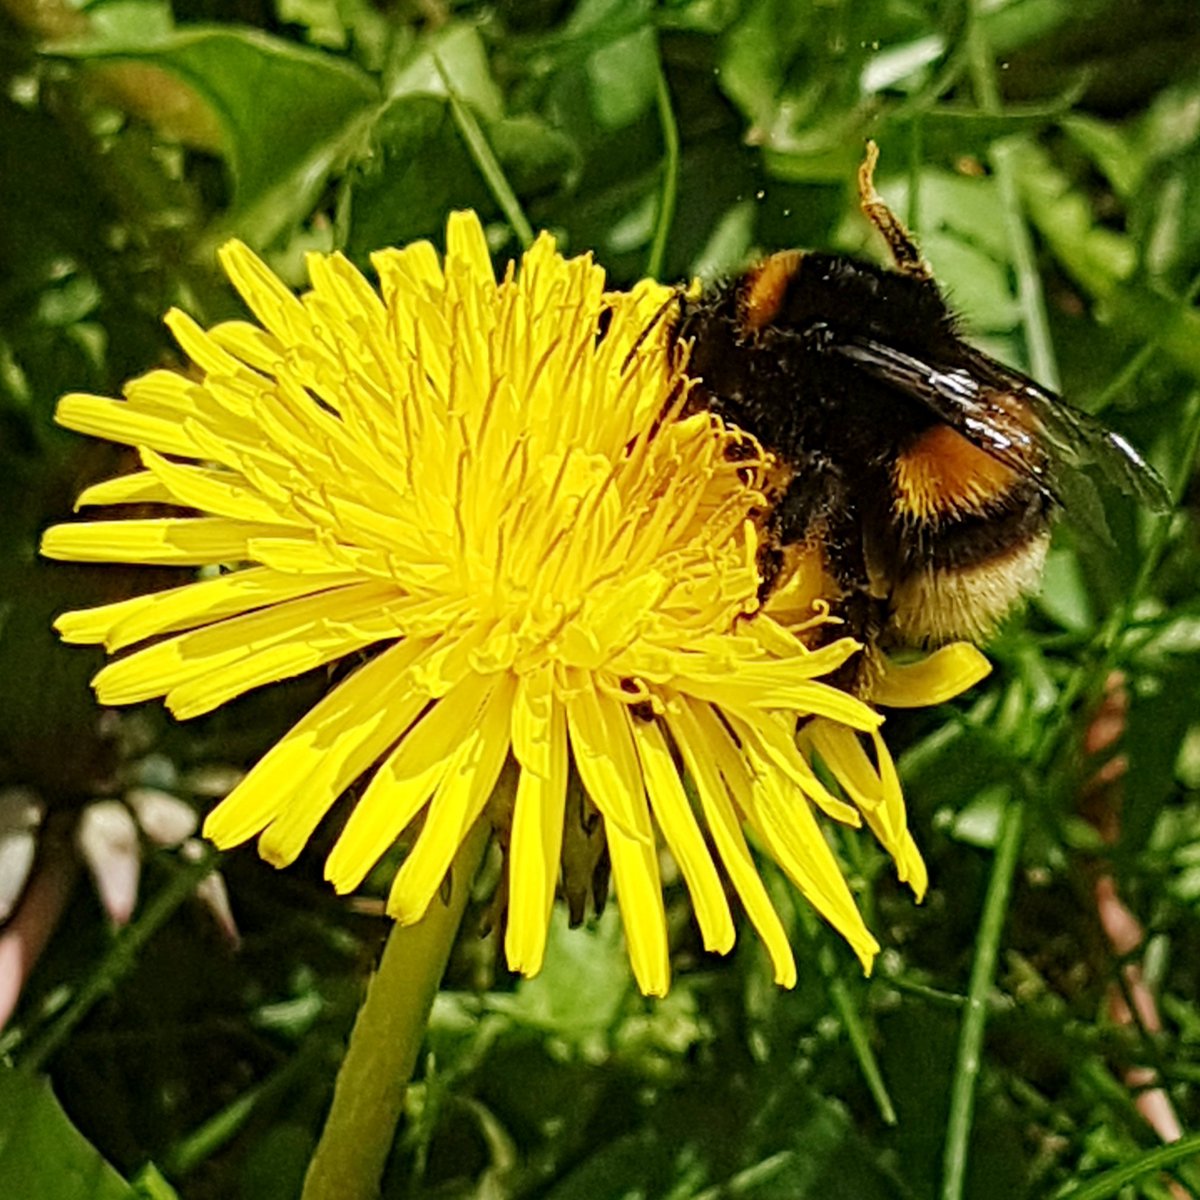 #InternationalDayoftheDandelion much to my neighbours annoyance, the garden is full of dandelions and it's so worth it! The #bees are loving it🐝